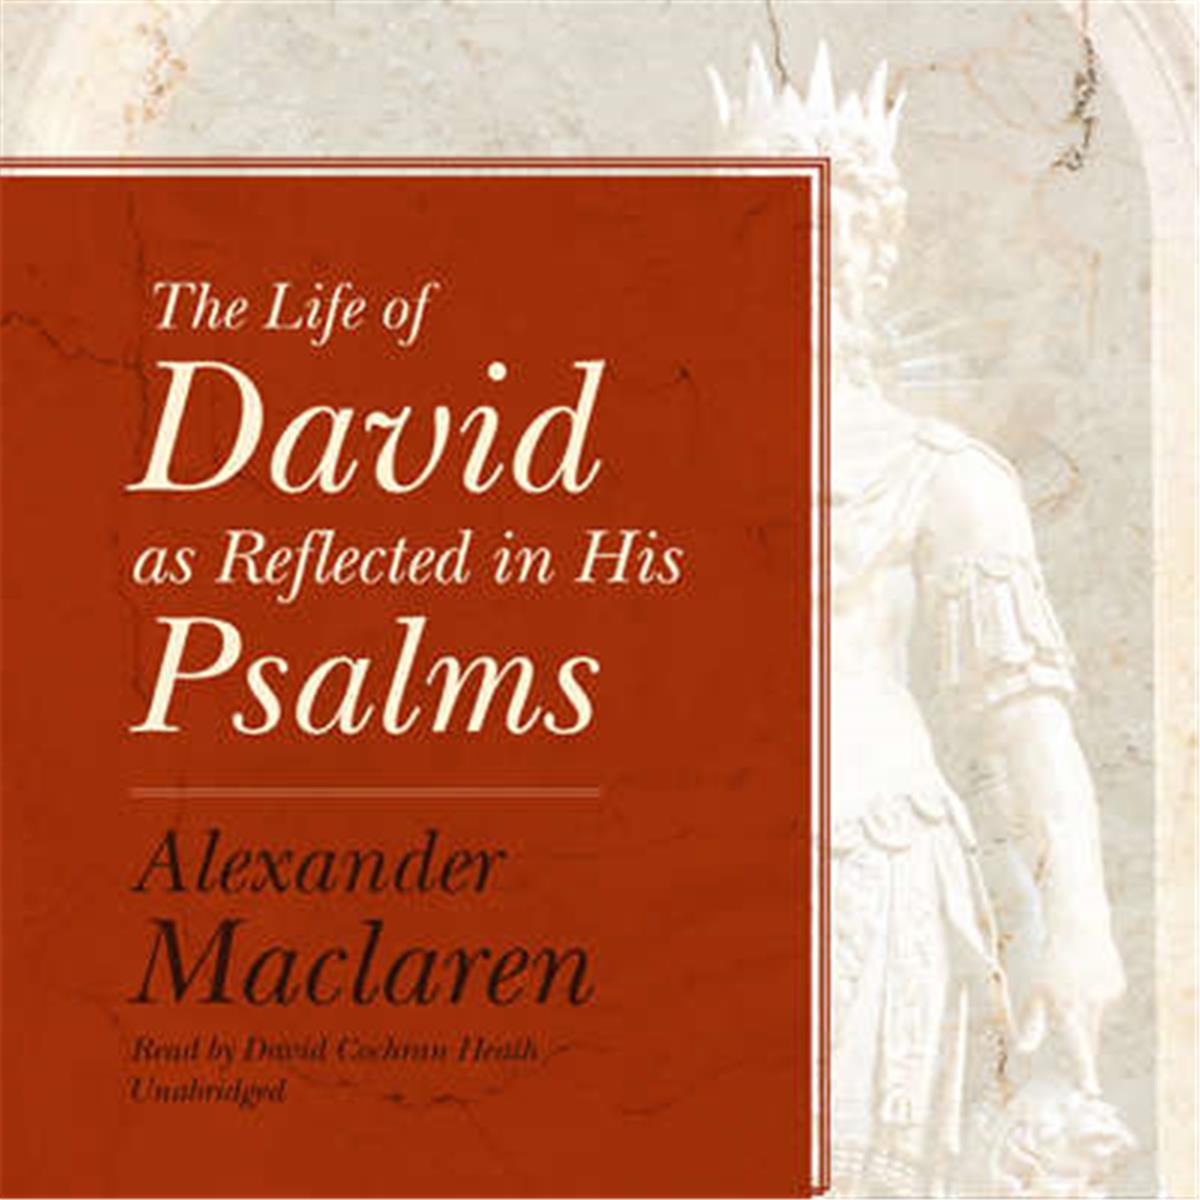 9781538555538 The Life of David as Reflected in His Psalms by Alexander Maclaren -  Blackstone